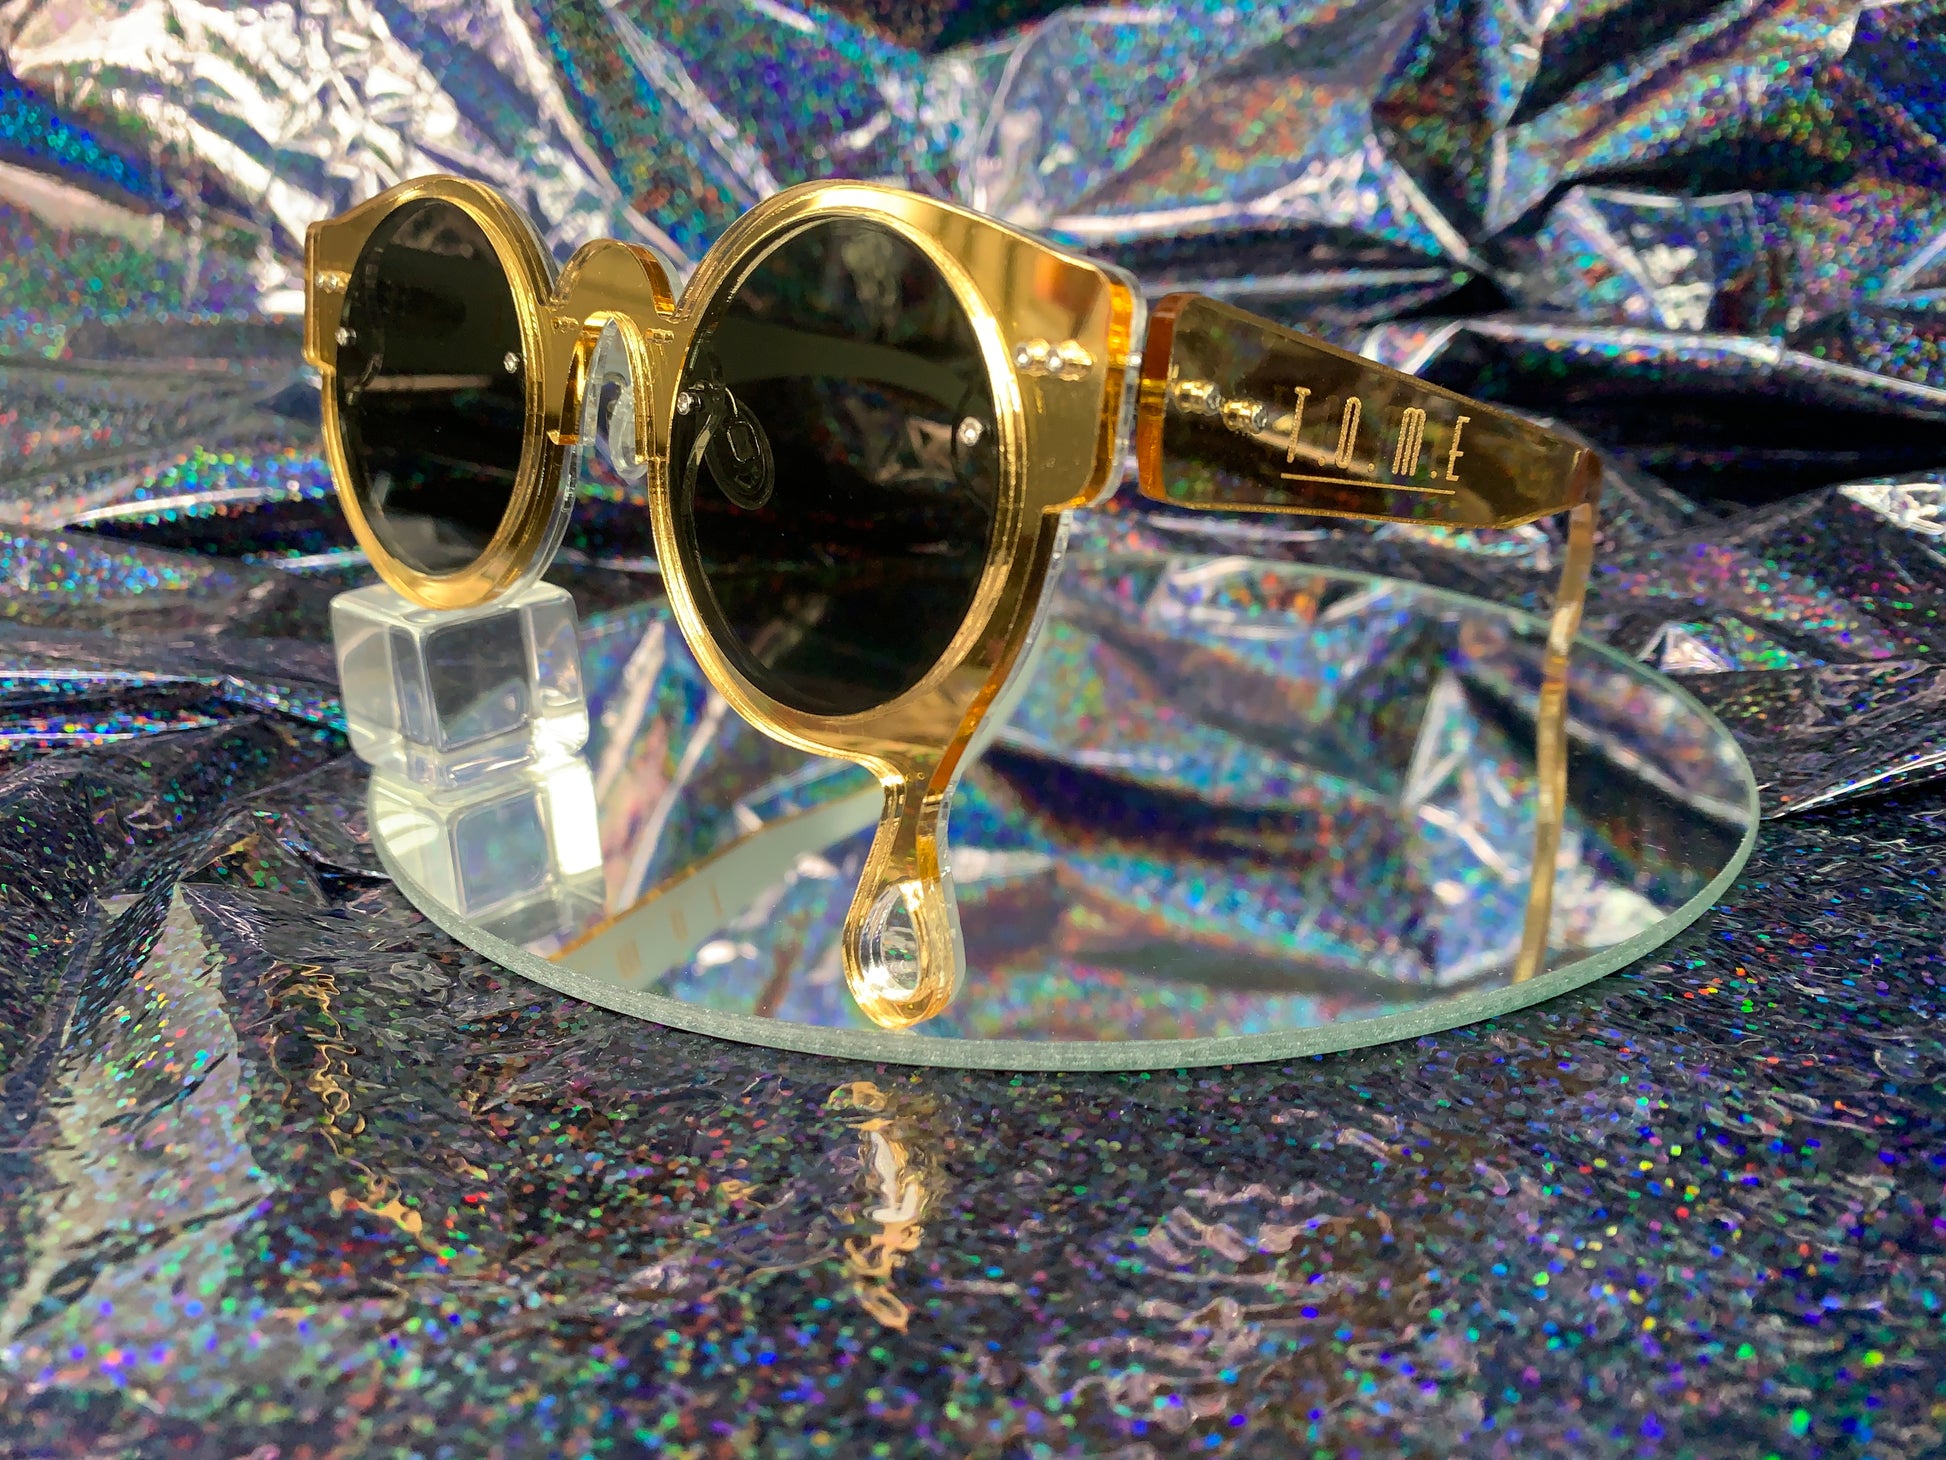 A side view of acrylic laser cut sunglasses with a teardrop accent dripping down the right side of the glasses with the brand logo T.O.M.E. etched on the temple. The color of the sunglasses shown are gold mirror.